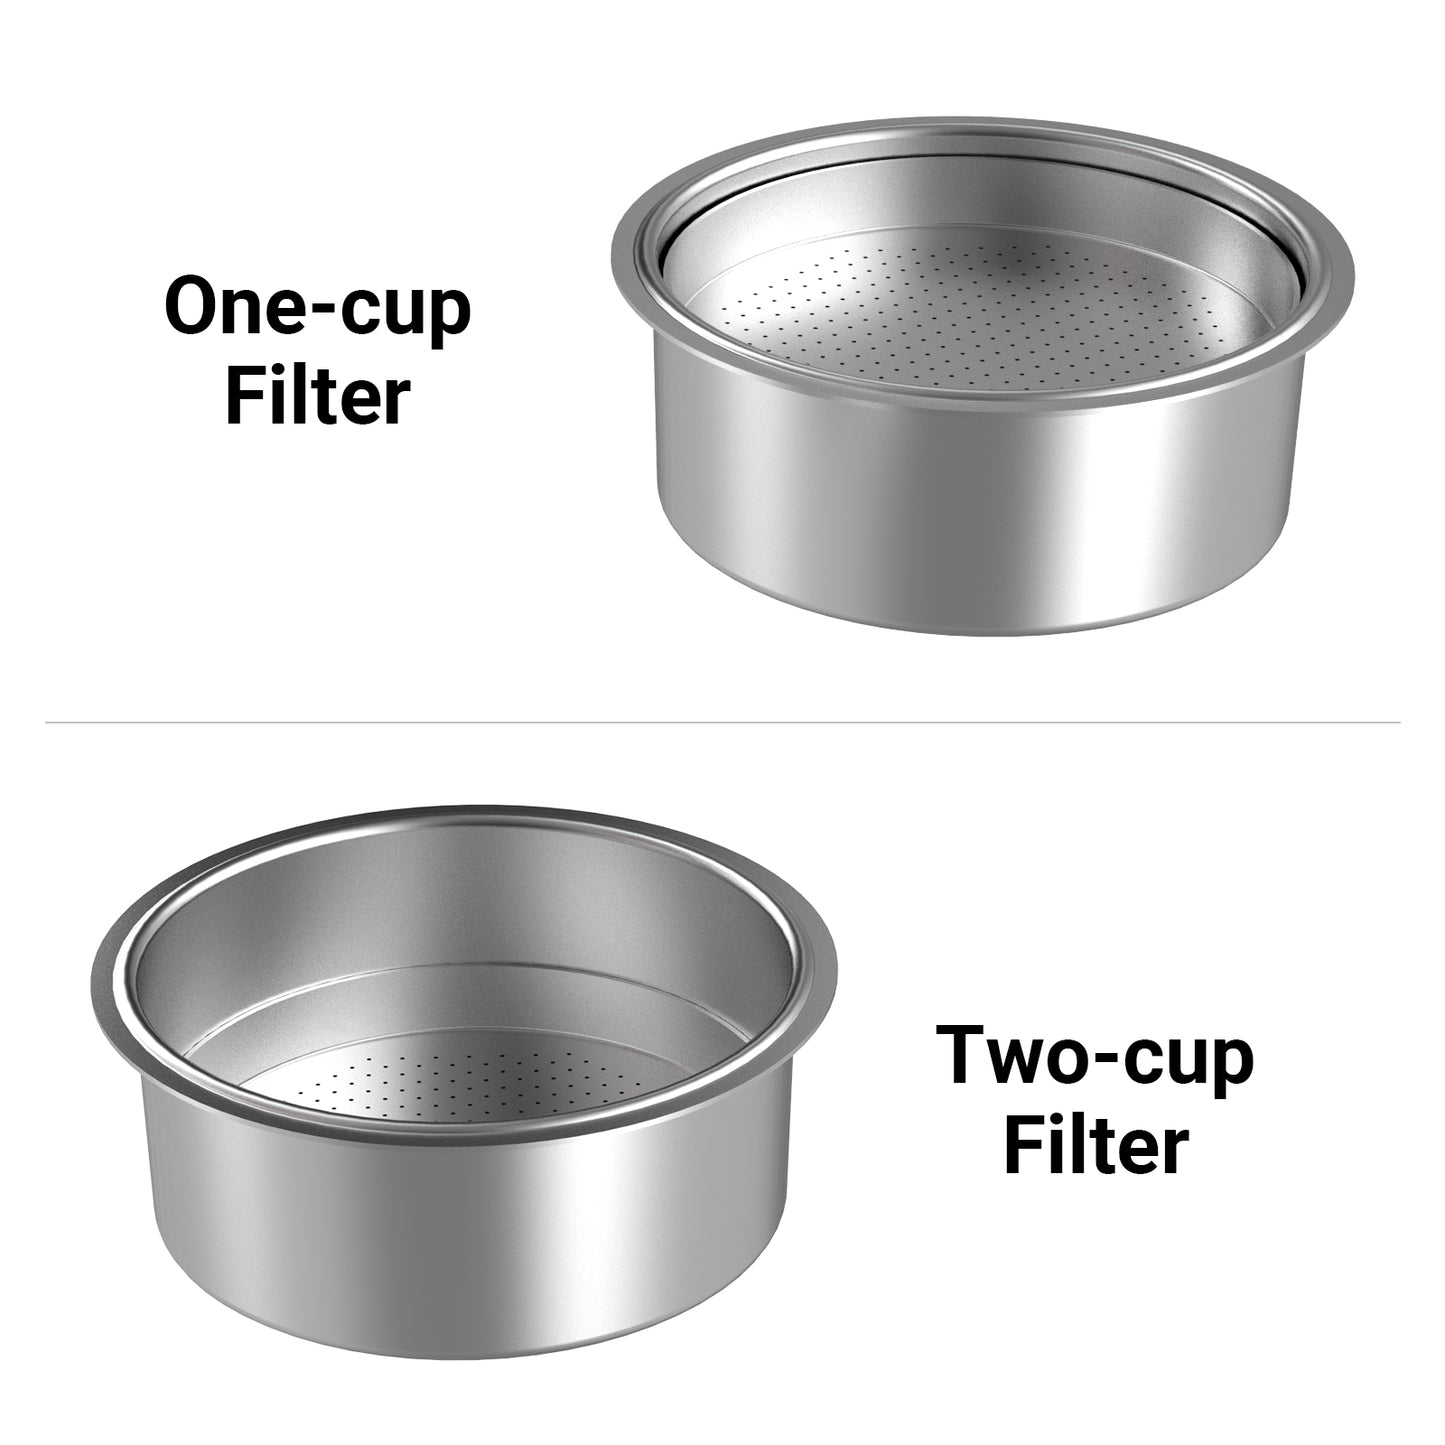 [New] Espresso Filter 51mm for Laekerrt CMEP01/CMEP02 Espresso Machine, included One-cup and Two-cup Filter